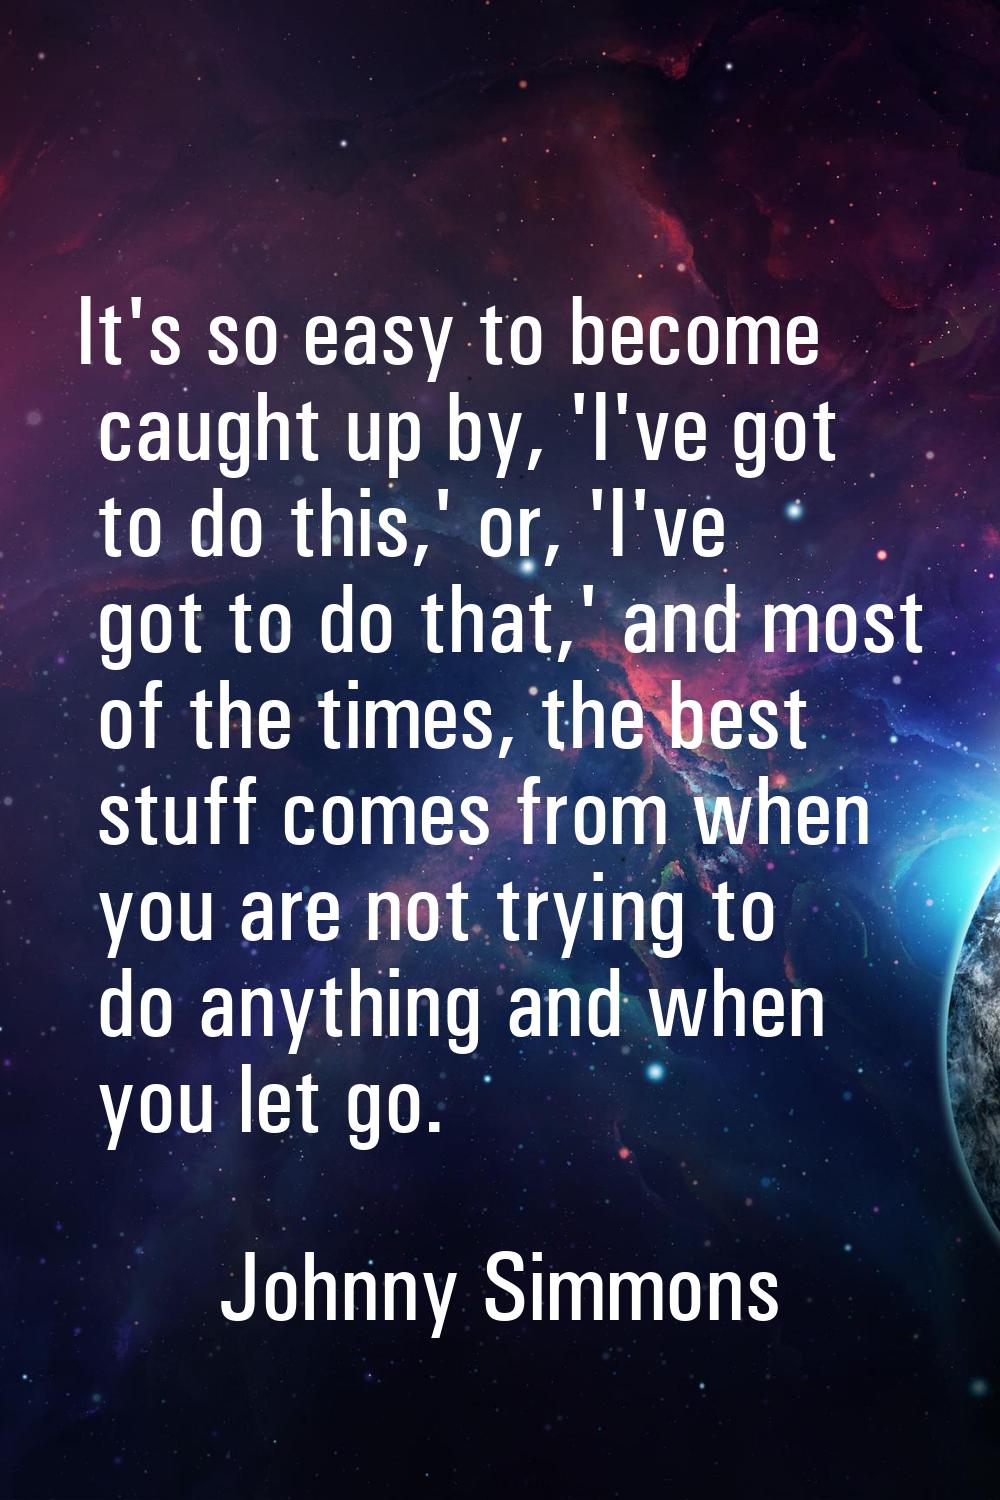 It's so easy to become caught up by, 'I've got to do this,' or, 'I've got to do that,' and most of 